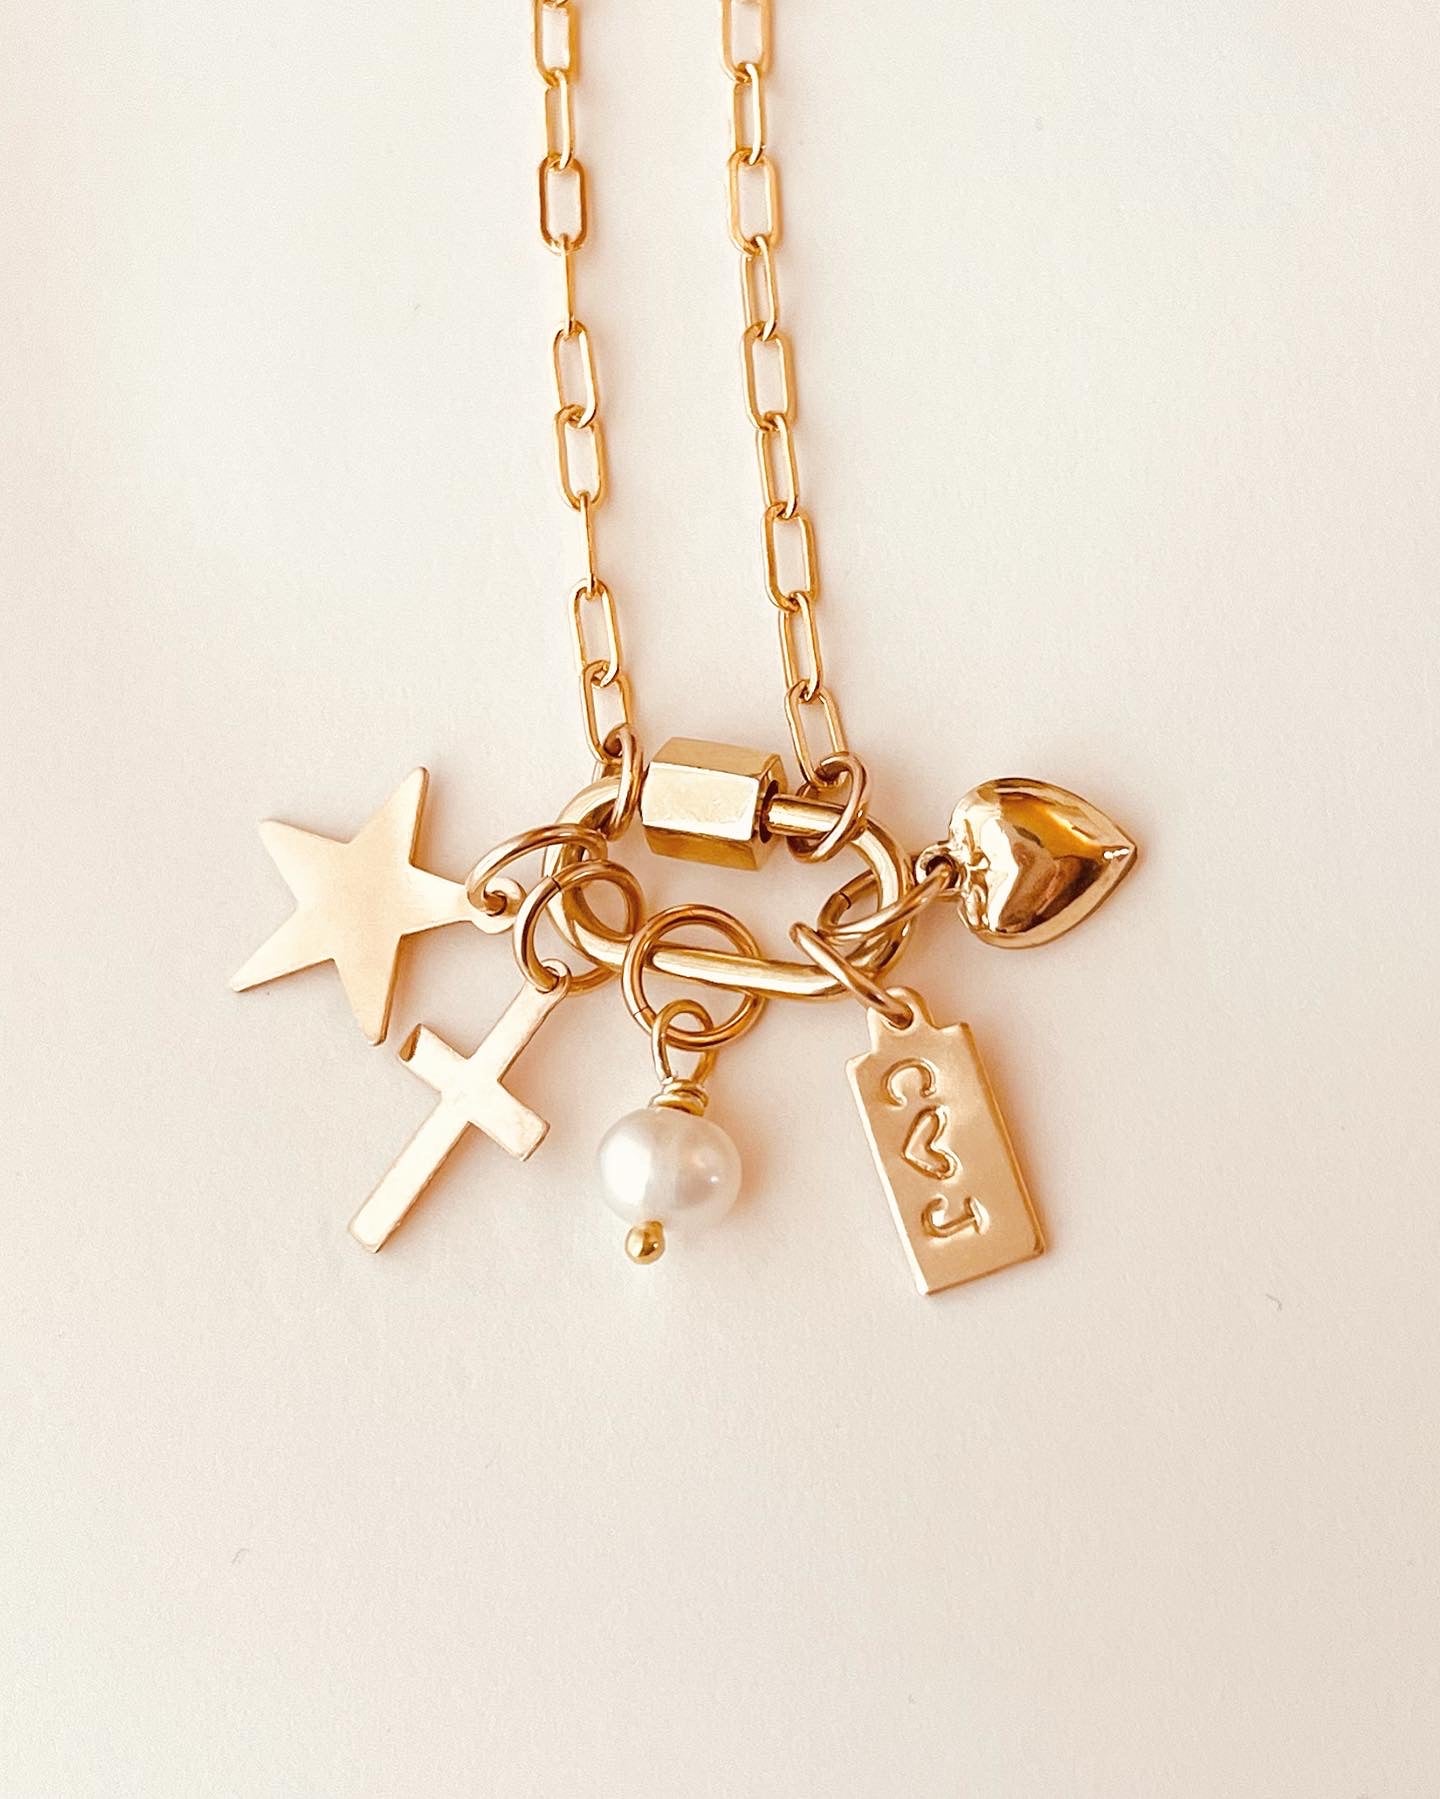 Chunky Charm Necklace